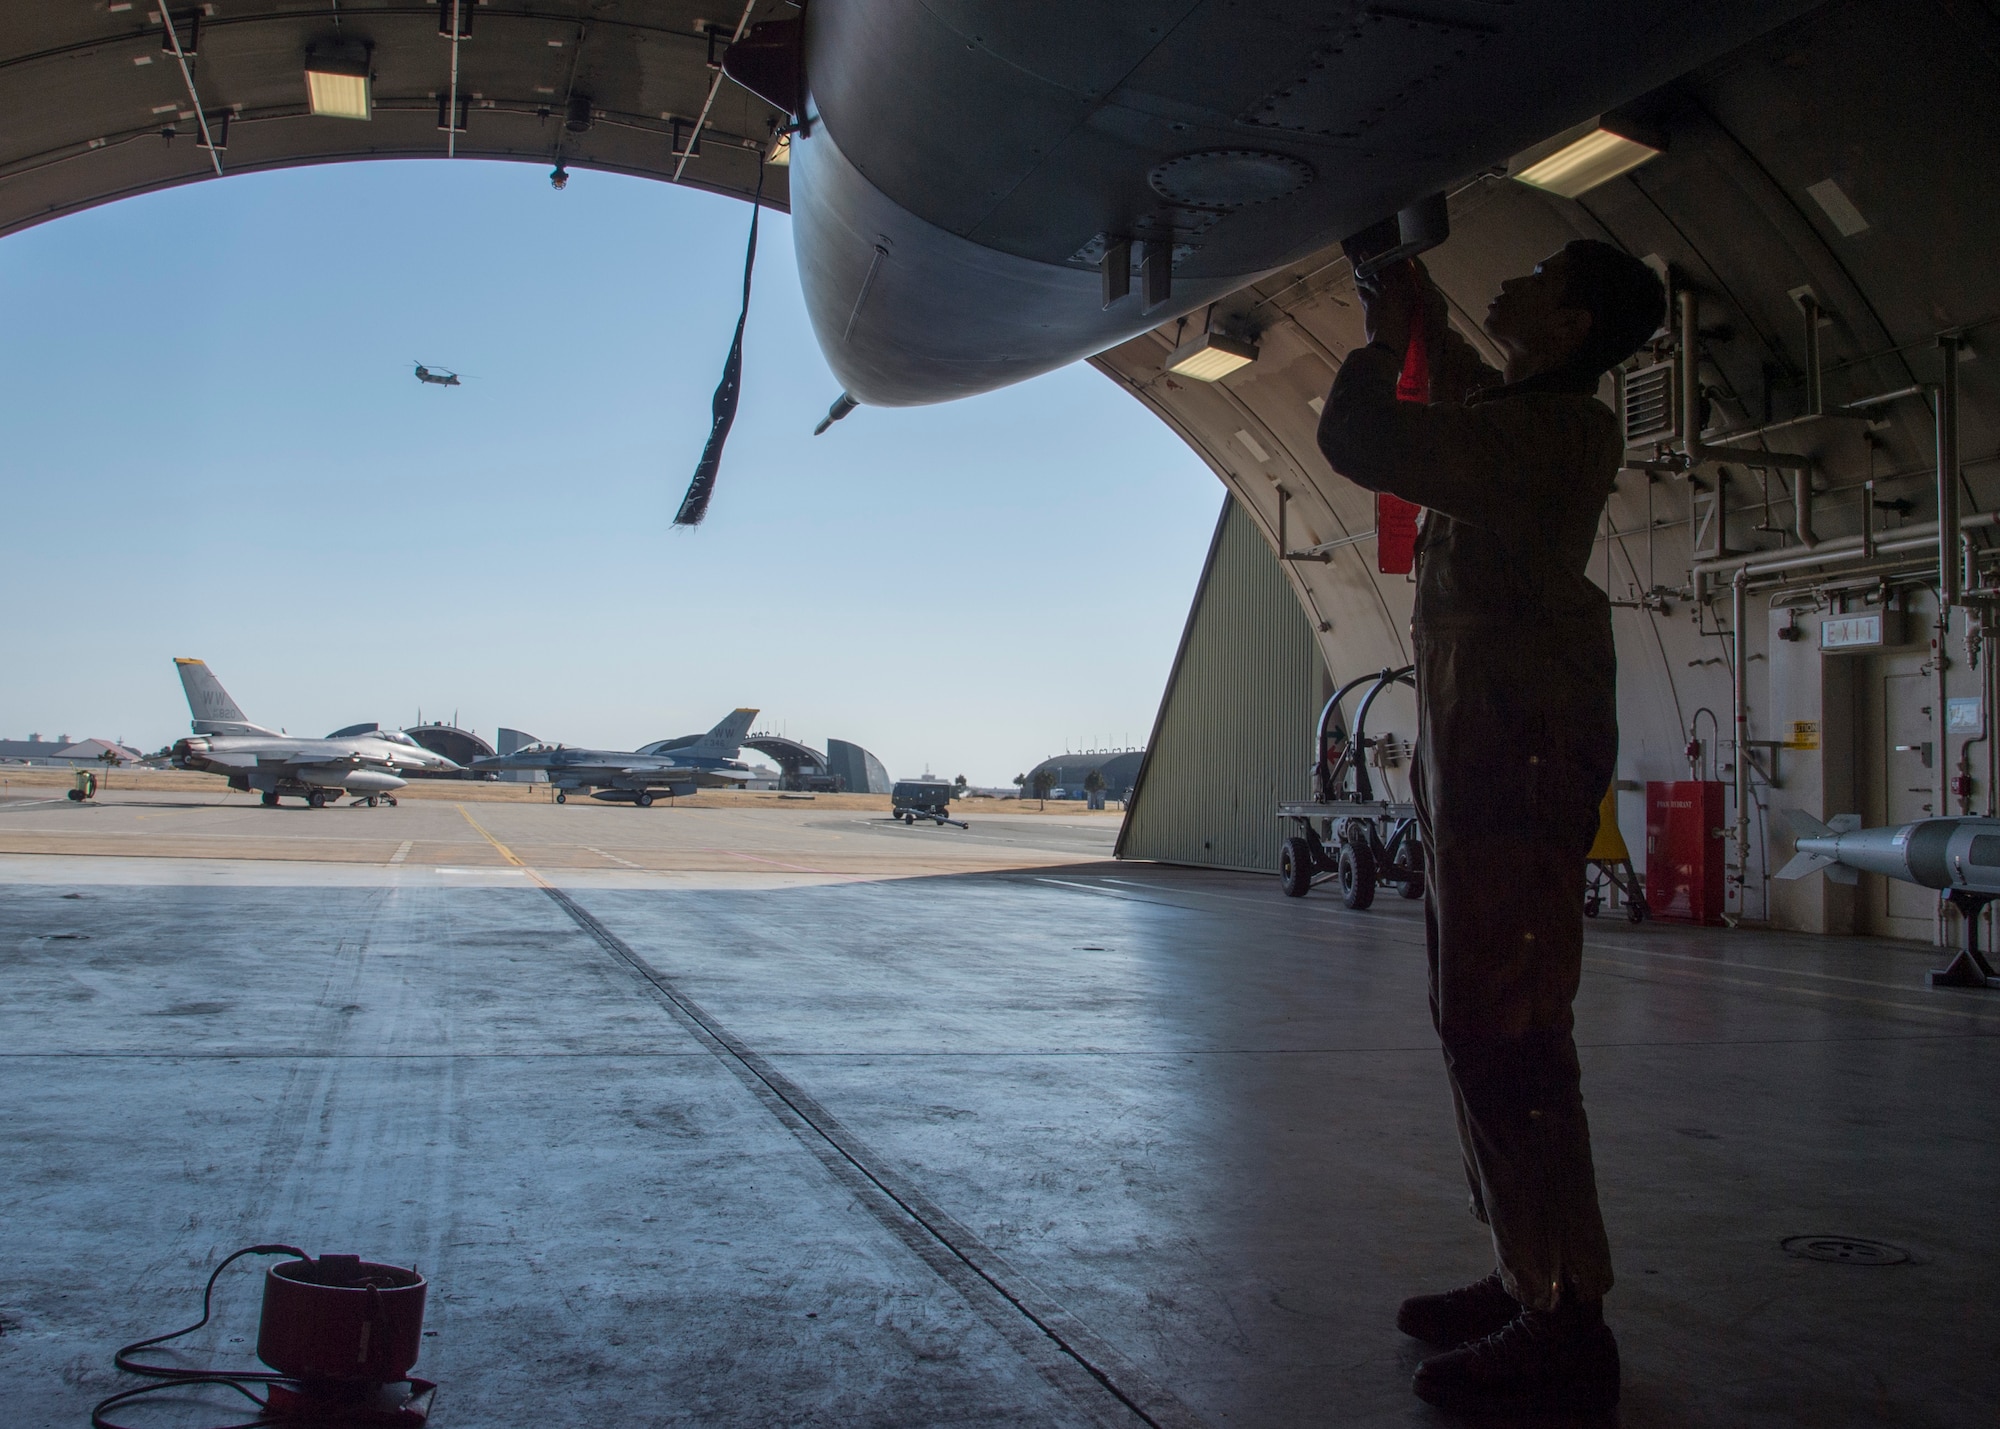 Senior Airman Kyle Lacy, a crew chief with the 35th Maintenance Squadron, places probe covers on an F-16 Fighting Falcon during a surge operation at Misawa Air Base, Japan, April 5, 2016. Crew chiefs perform post-flight inspections to ensure the F-16 remains capable of performing suppression of enemy air defense tactics. (U.S. Air Force photo/Airman 1st Class Jordyn Fetter)